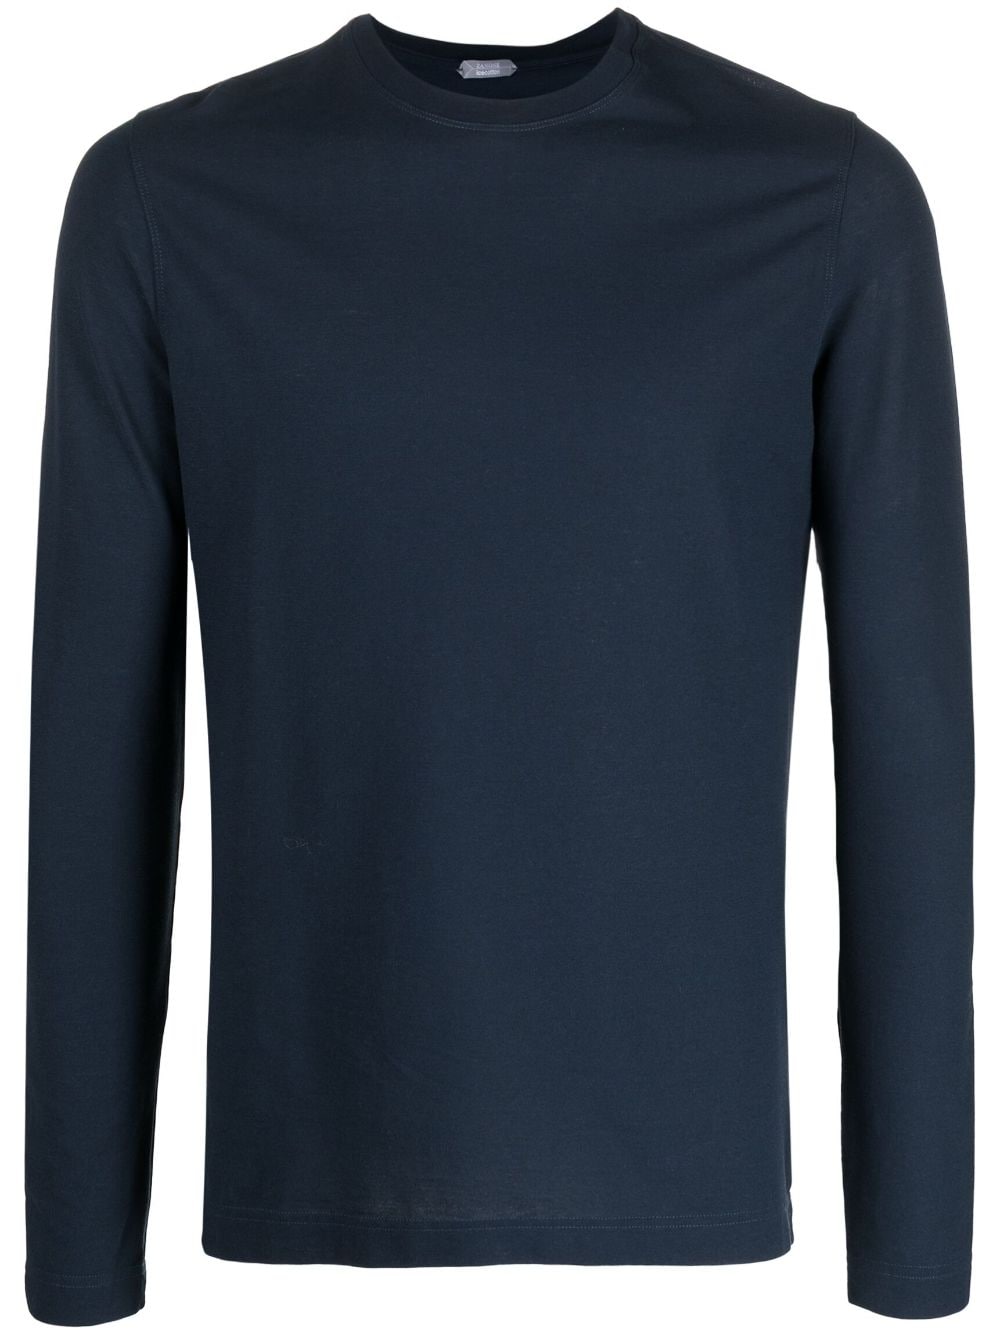 Zanone Long-sleeved Cotton T-shirt In Black